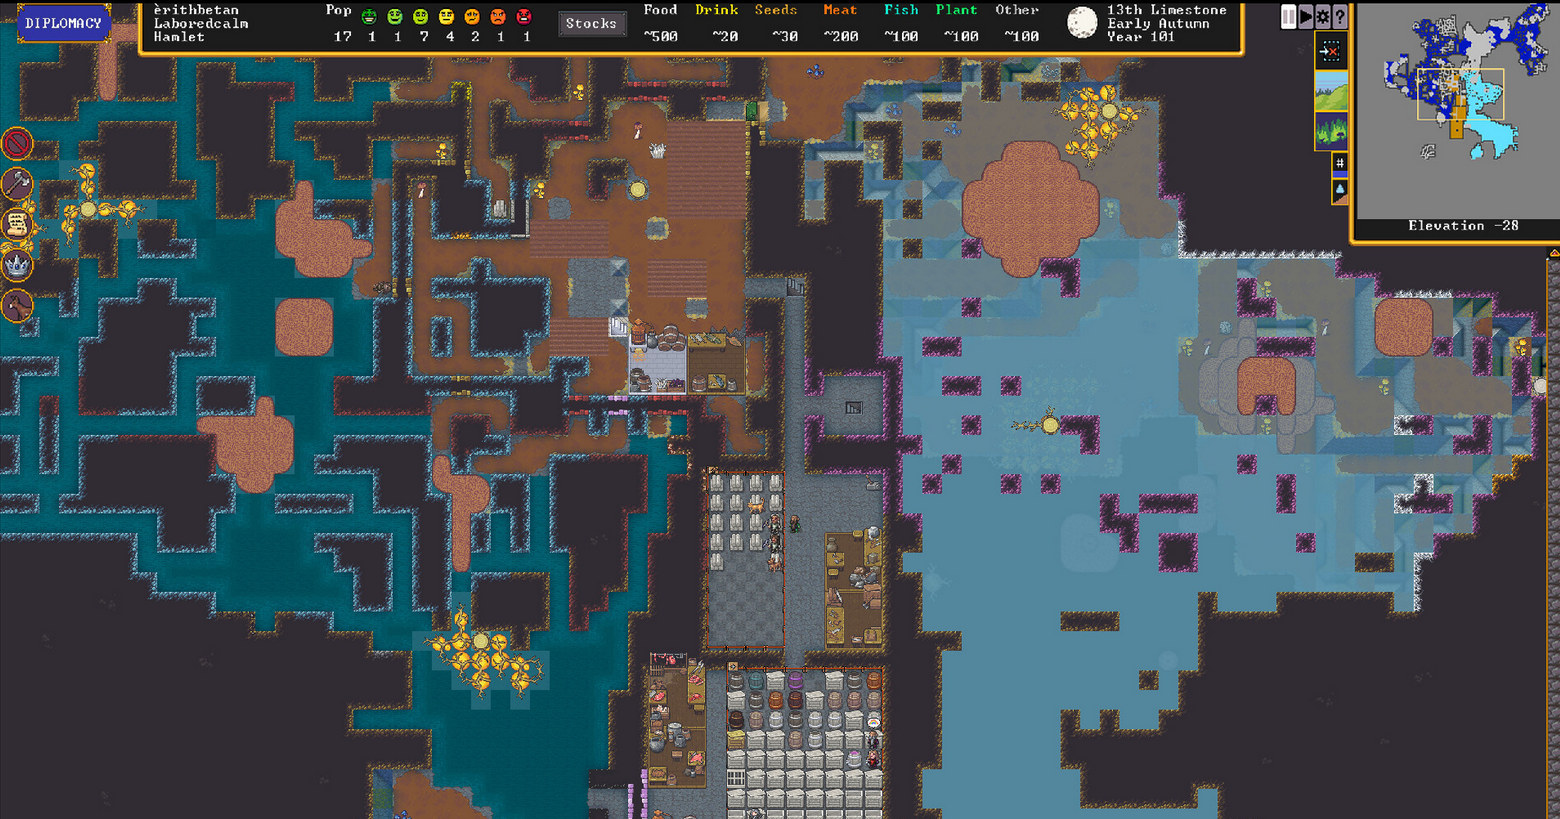 The screenshot shows an underground dwarf fortress in a top-down view. The entire frame is covered by an extremely complex mining system, which consists of numerous rectangular corridors and rooms. At the bottom, two large rooms are shown with numerous different colored barrels and silver chests next to each other. Above them, a lounge with wooden tables and chairs can be seen. On the left, opposite, there is another room with stored chests. On the left half of the picture, most of the corridors are filled with turquoise paint, suggesting water penetration. On the right side of the picture, we look at a much denser and more connected complex of rooms, which also seem to be filled with water. In some places in the corridors, gold accumulations in the form of yellow balls can be glimpsed. As of today, the Steam Edition for the game is available, which brings graphical and gameplay improvements. A Dwarf Fortress guide provides a good introduction with valuable tips for a beginner.